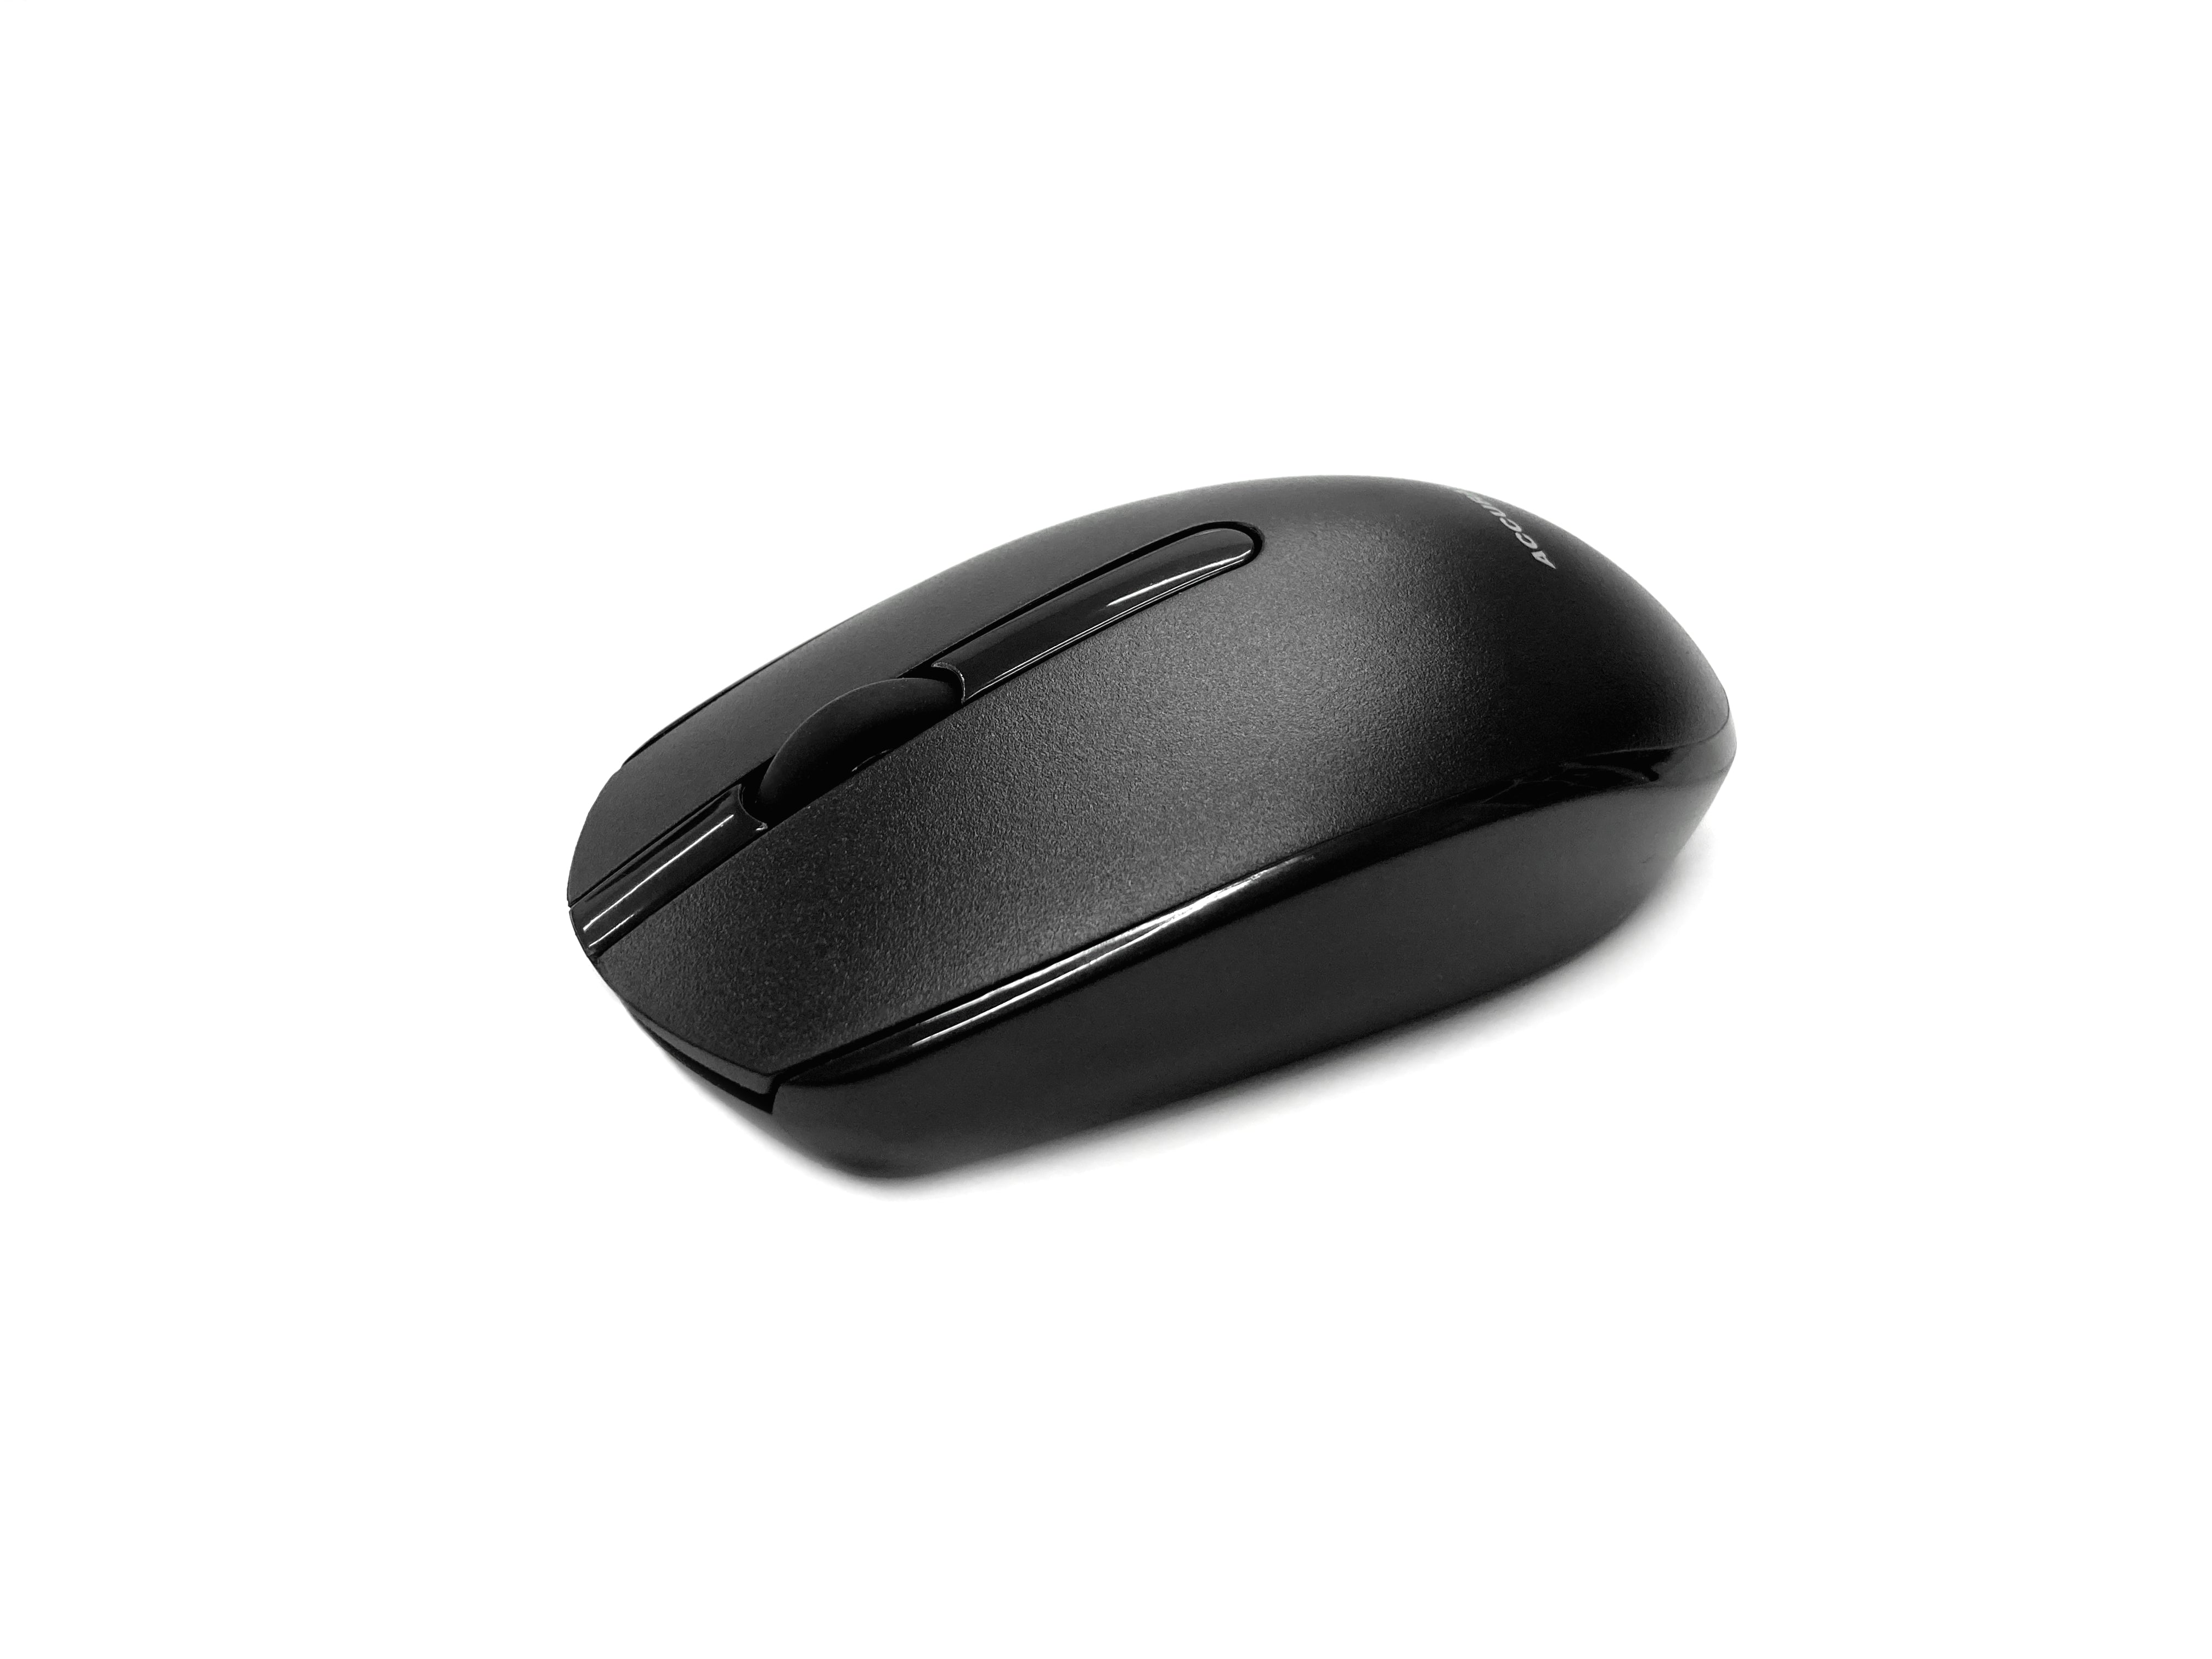 Accuratus M100 Multidevice Wireless - Multidevice Dual Bluetooth 5.1 & RF 2.4Ghz Wireless Full Size Mouse - Black